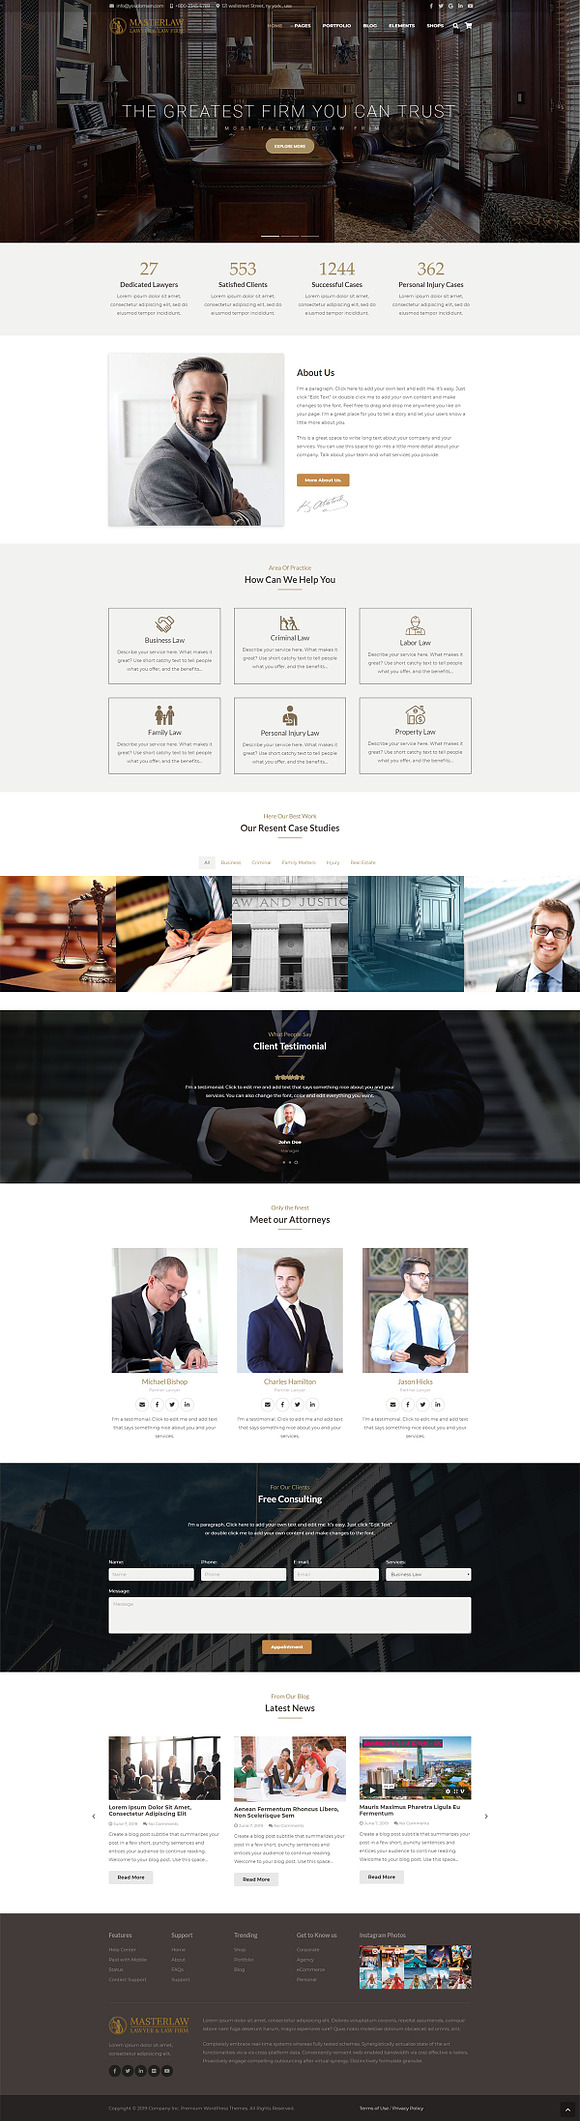 Masterlaw – Lawyers & Law Firm Theme in WordPress Business Themes - product preview 1